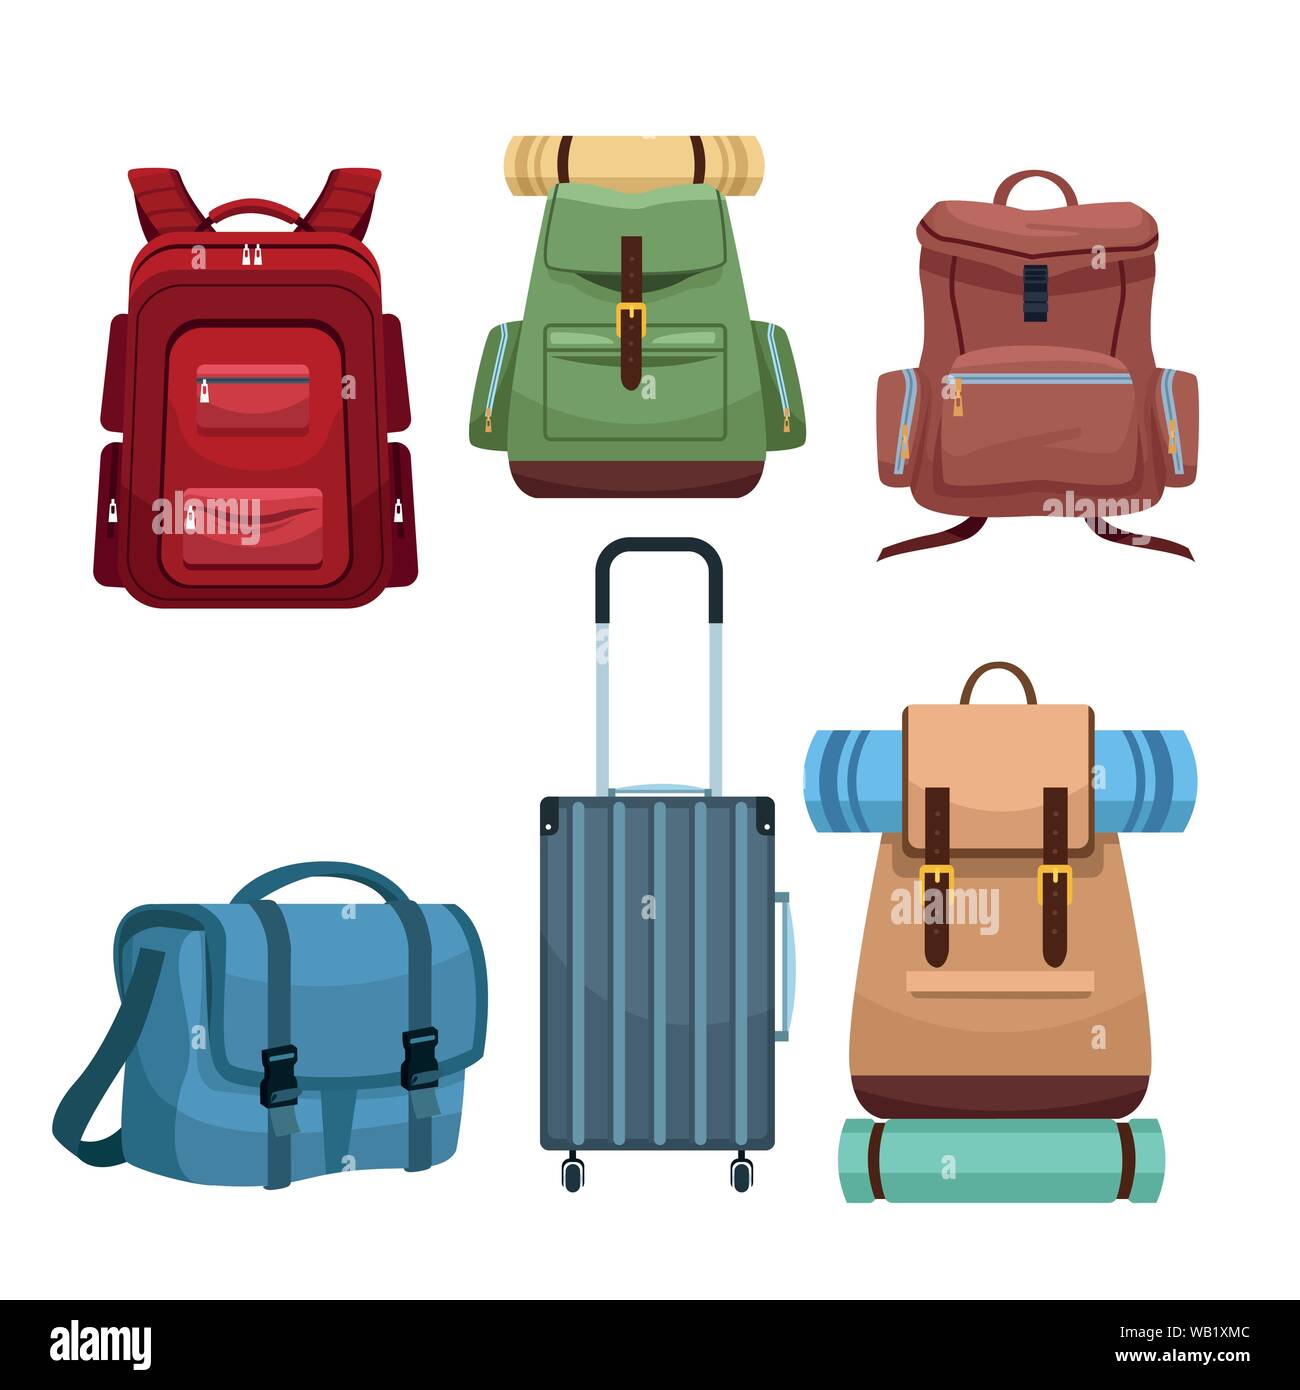 Luggage backpacks Cut Out Stock Images & Pictures - Alamy